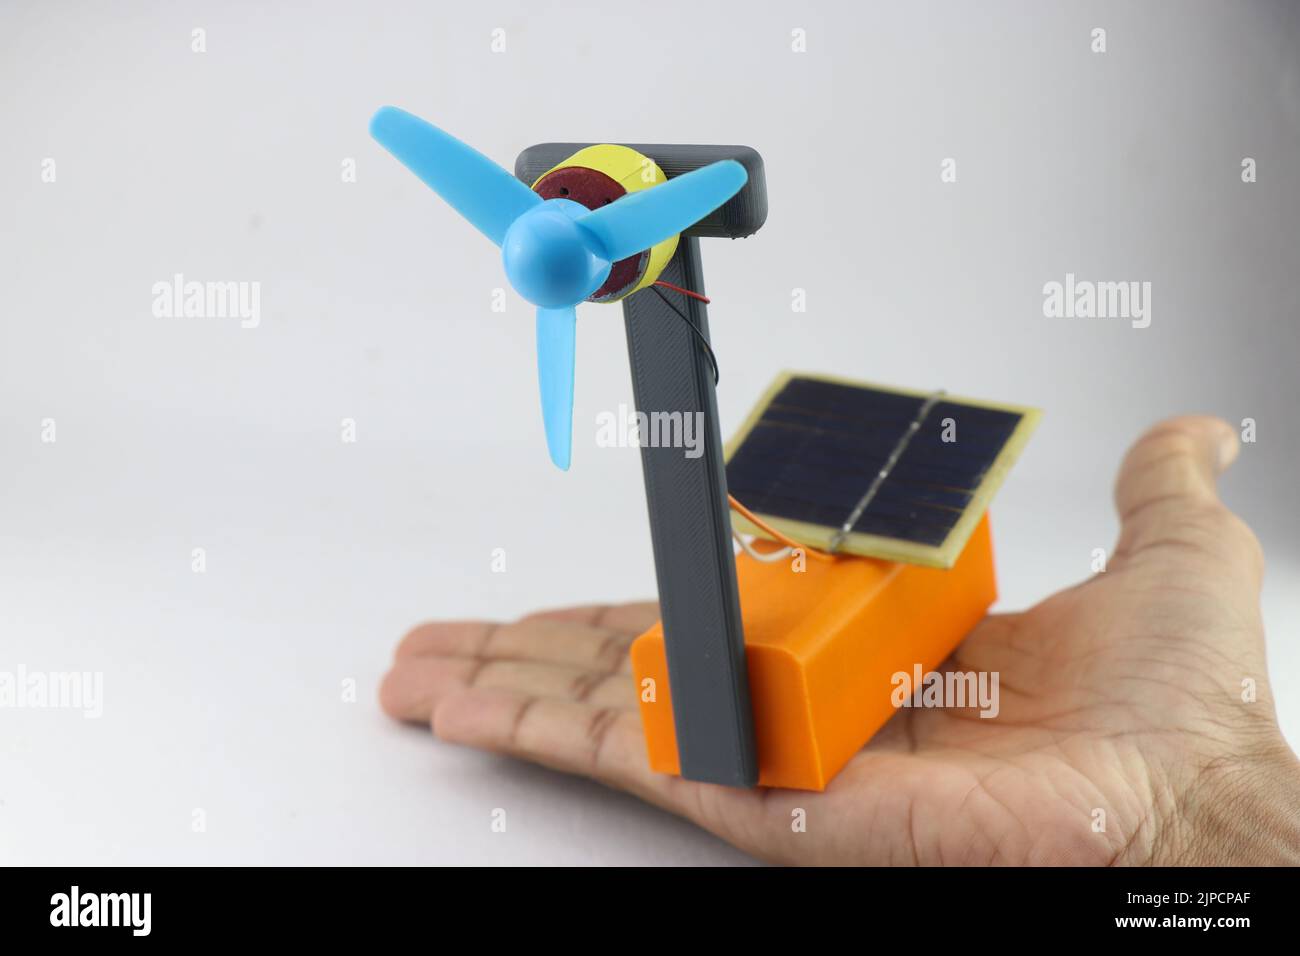 Solar energy absorbing solar panels that power small fan connected to a dc motor held in hand Stock Photo